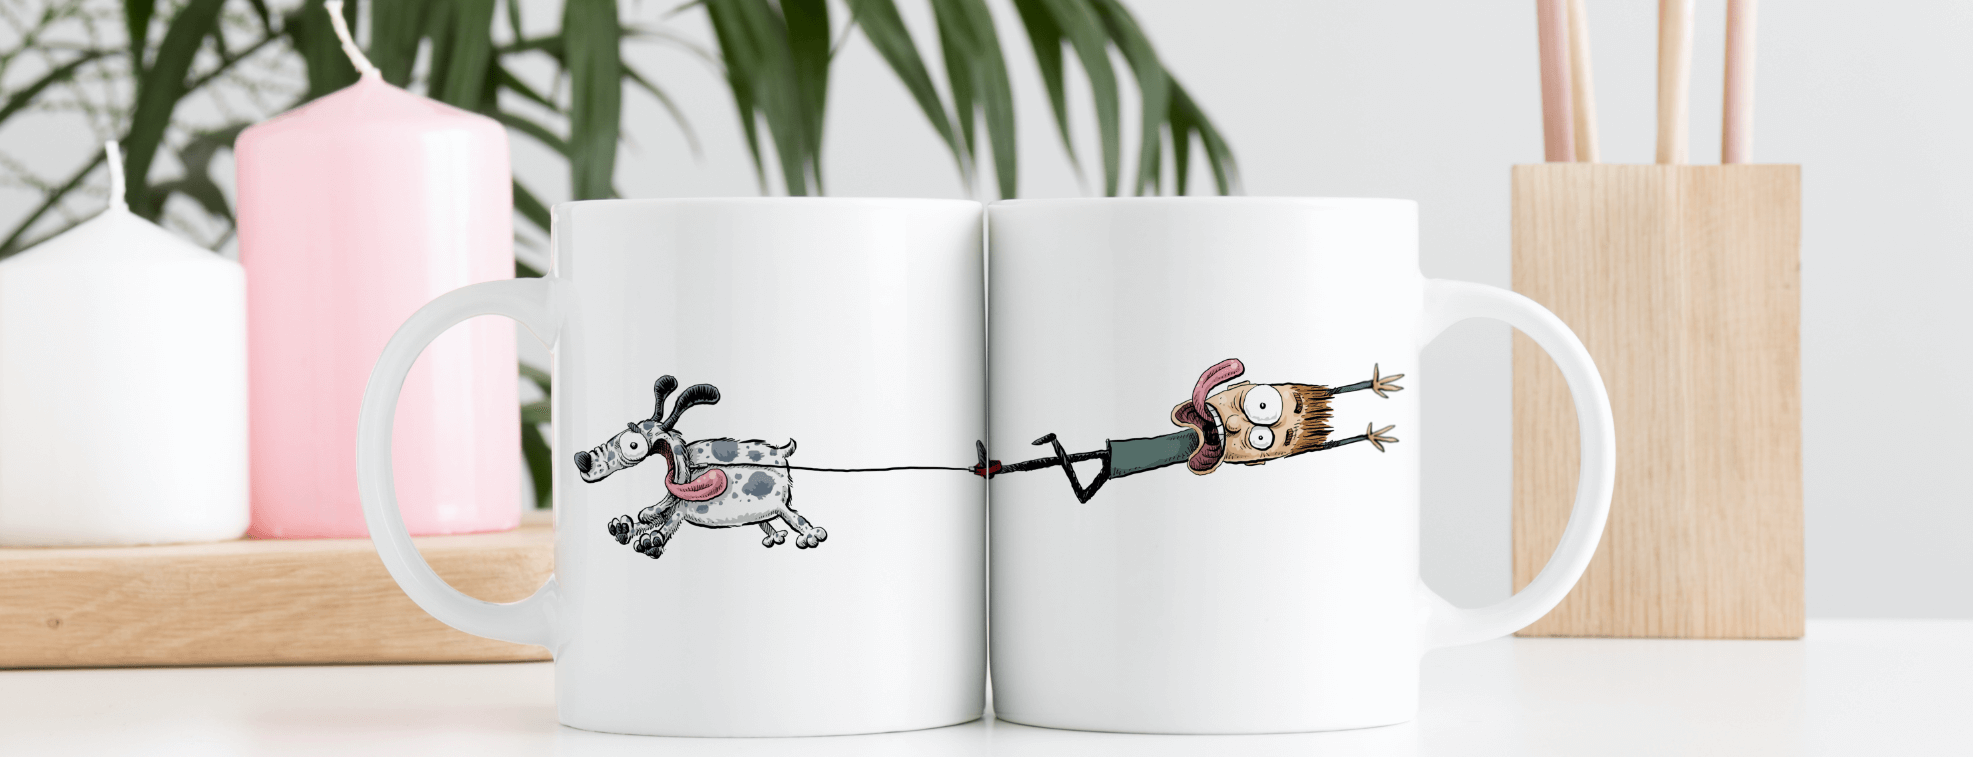 Funny mugs with an illustration of a dog dragging his owner